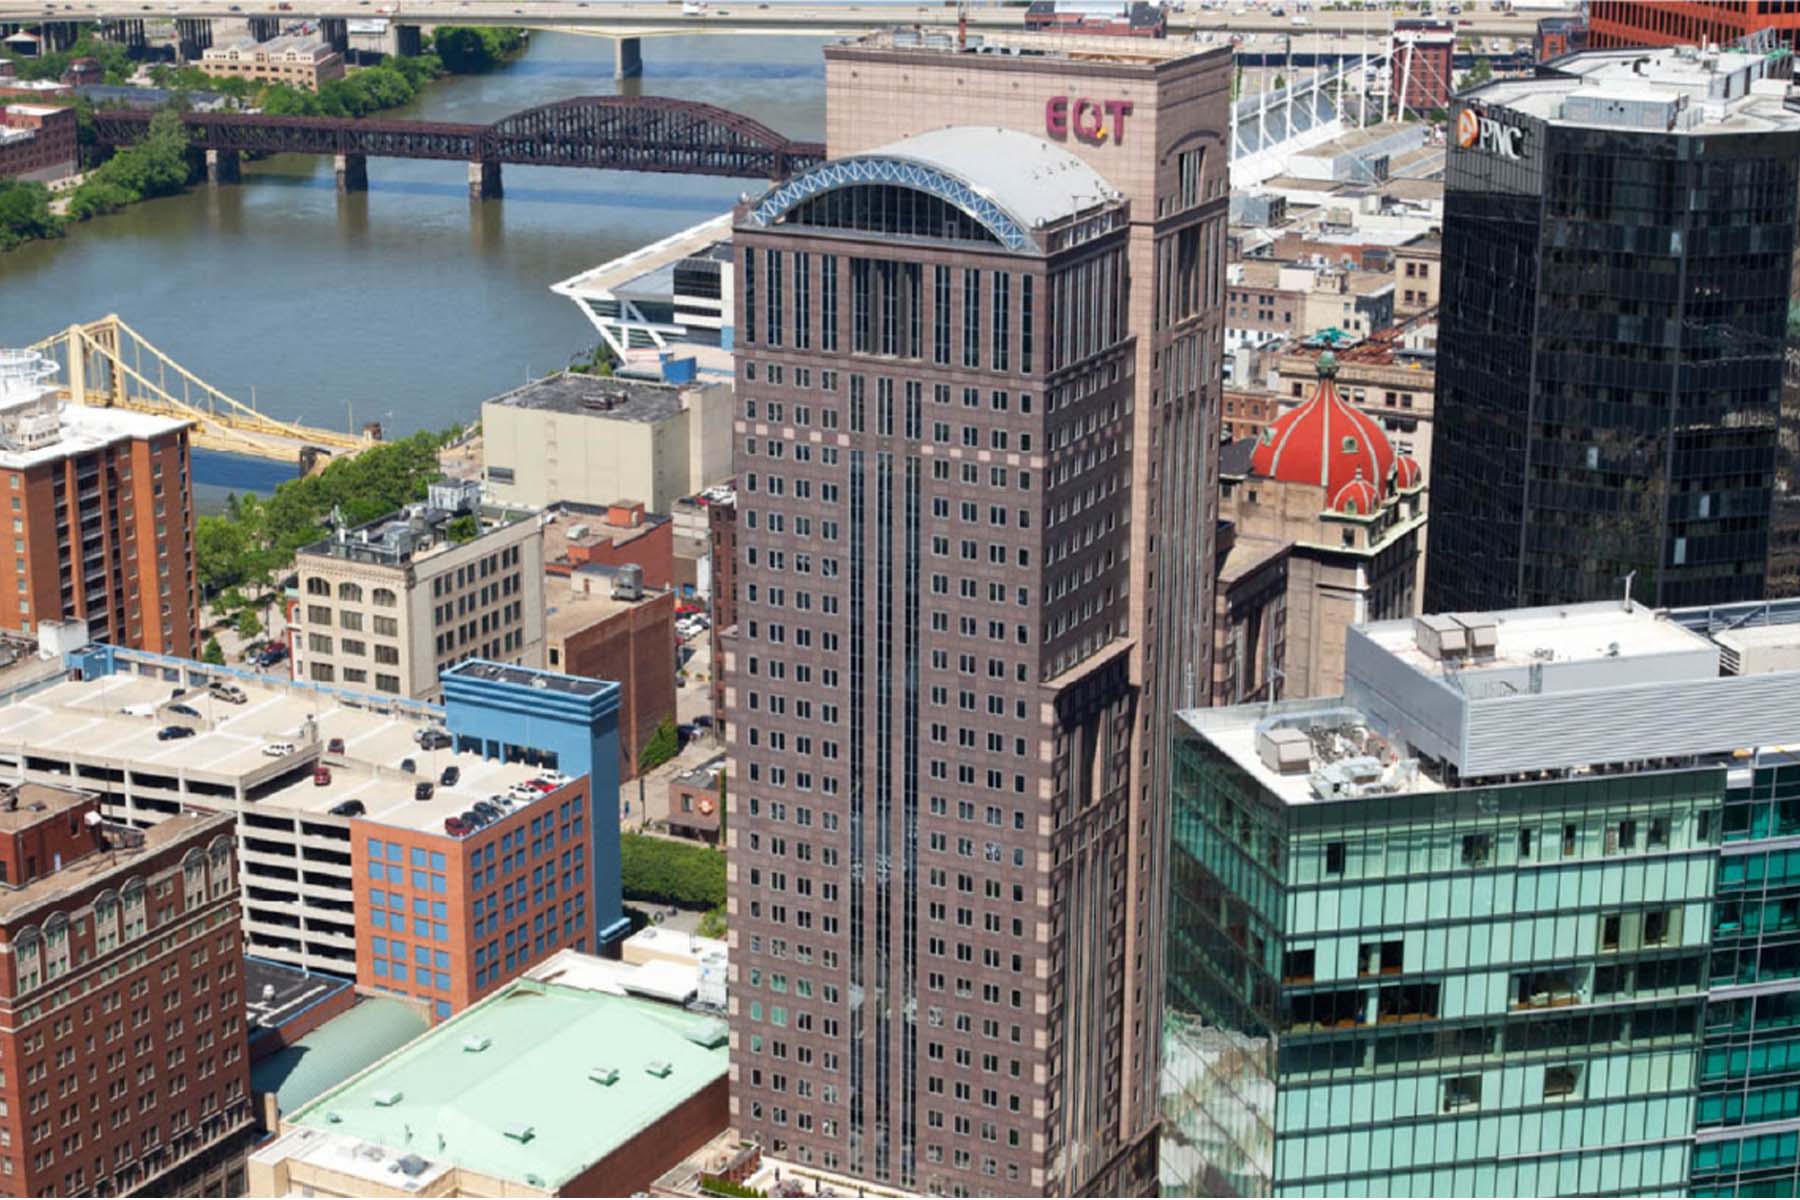 EQT Plaza tower in Pittsburgh